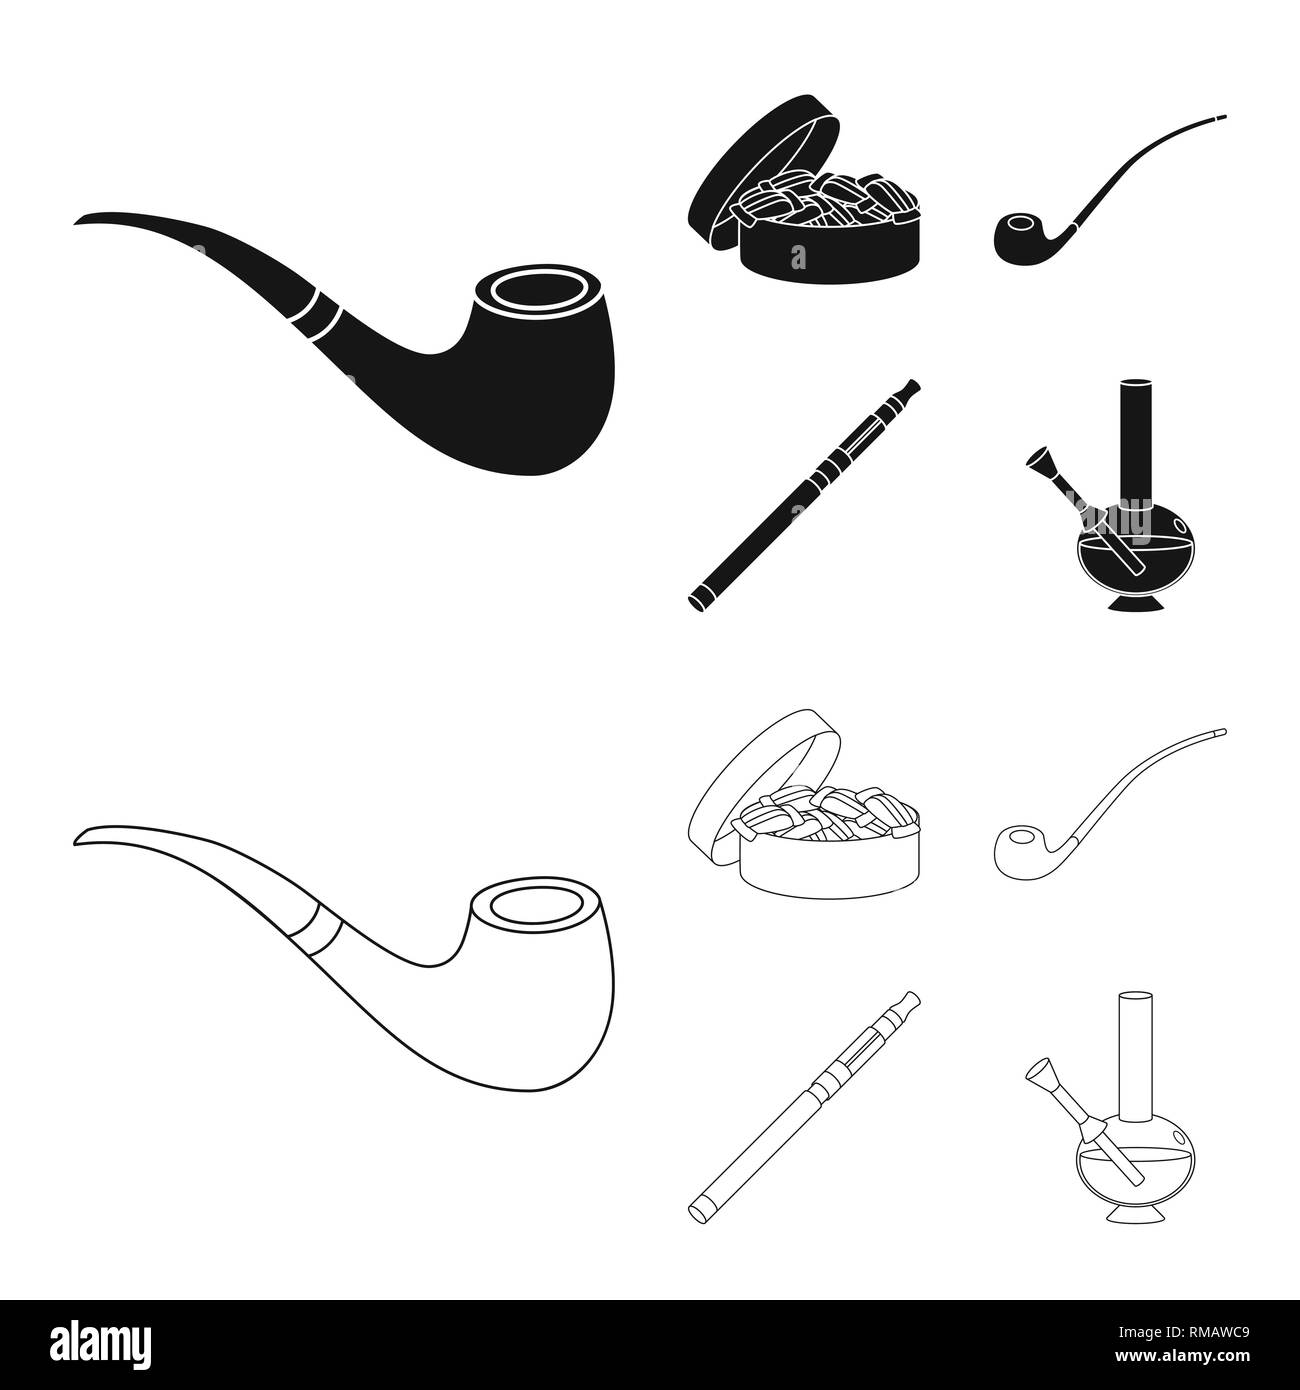 pipe,chewing,electronic,hookah,retro,addiction,filter,bong,wood,box,paper,drug,vapor,classic,harmful,vaporizer,bad,alternative,flask,detective,accessories,glass,style,candies,model,treatment,capacity,apparatus,refuse,stop,anti,habit,cigarette,tobacco,health,nicotine,smoke,statistics,set,vector,icon,illustration,isolated,collection,design,element,graphic,sign Vector Vectors , Stock Vector